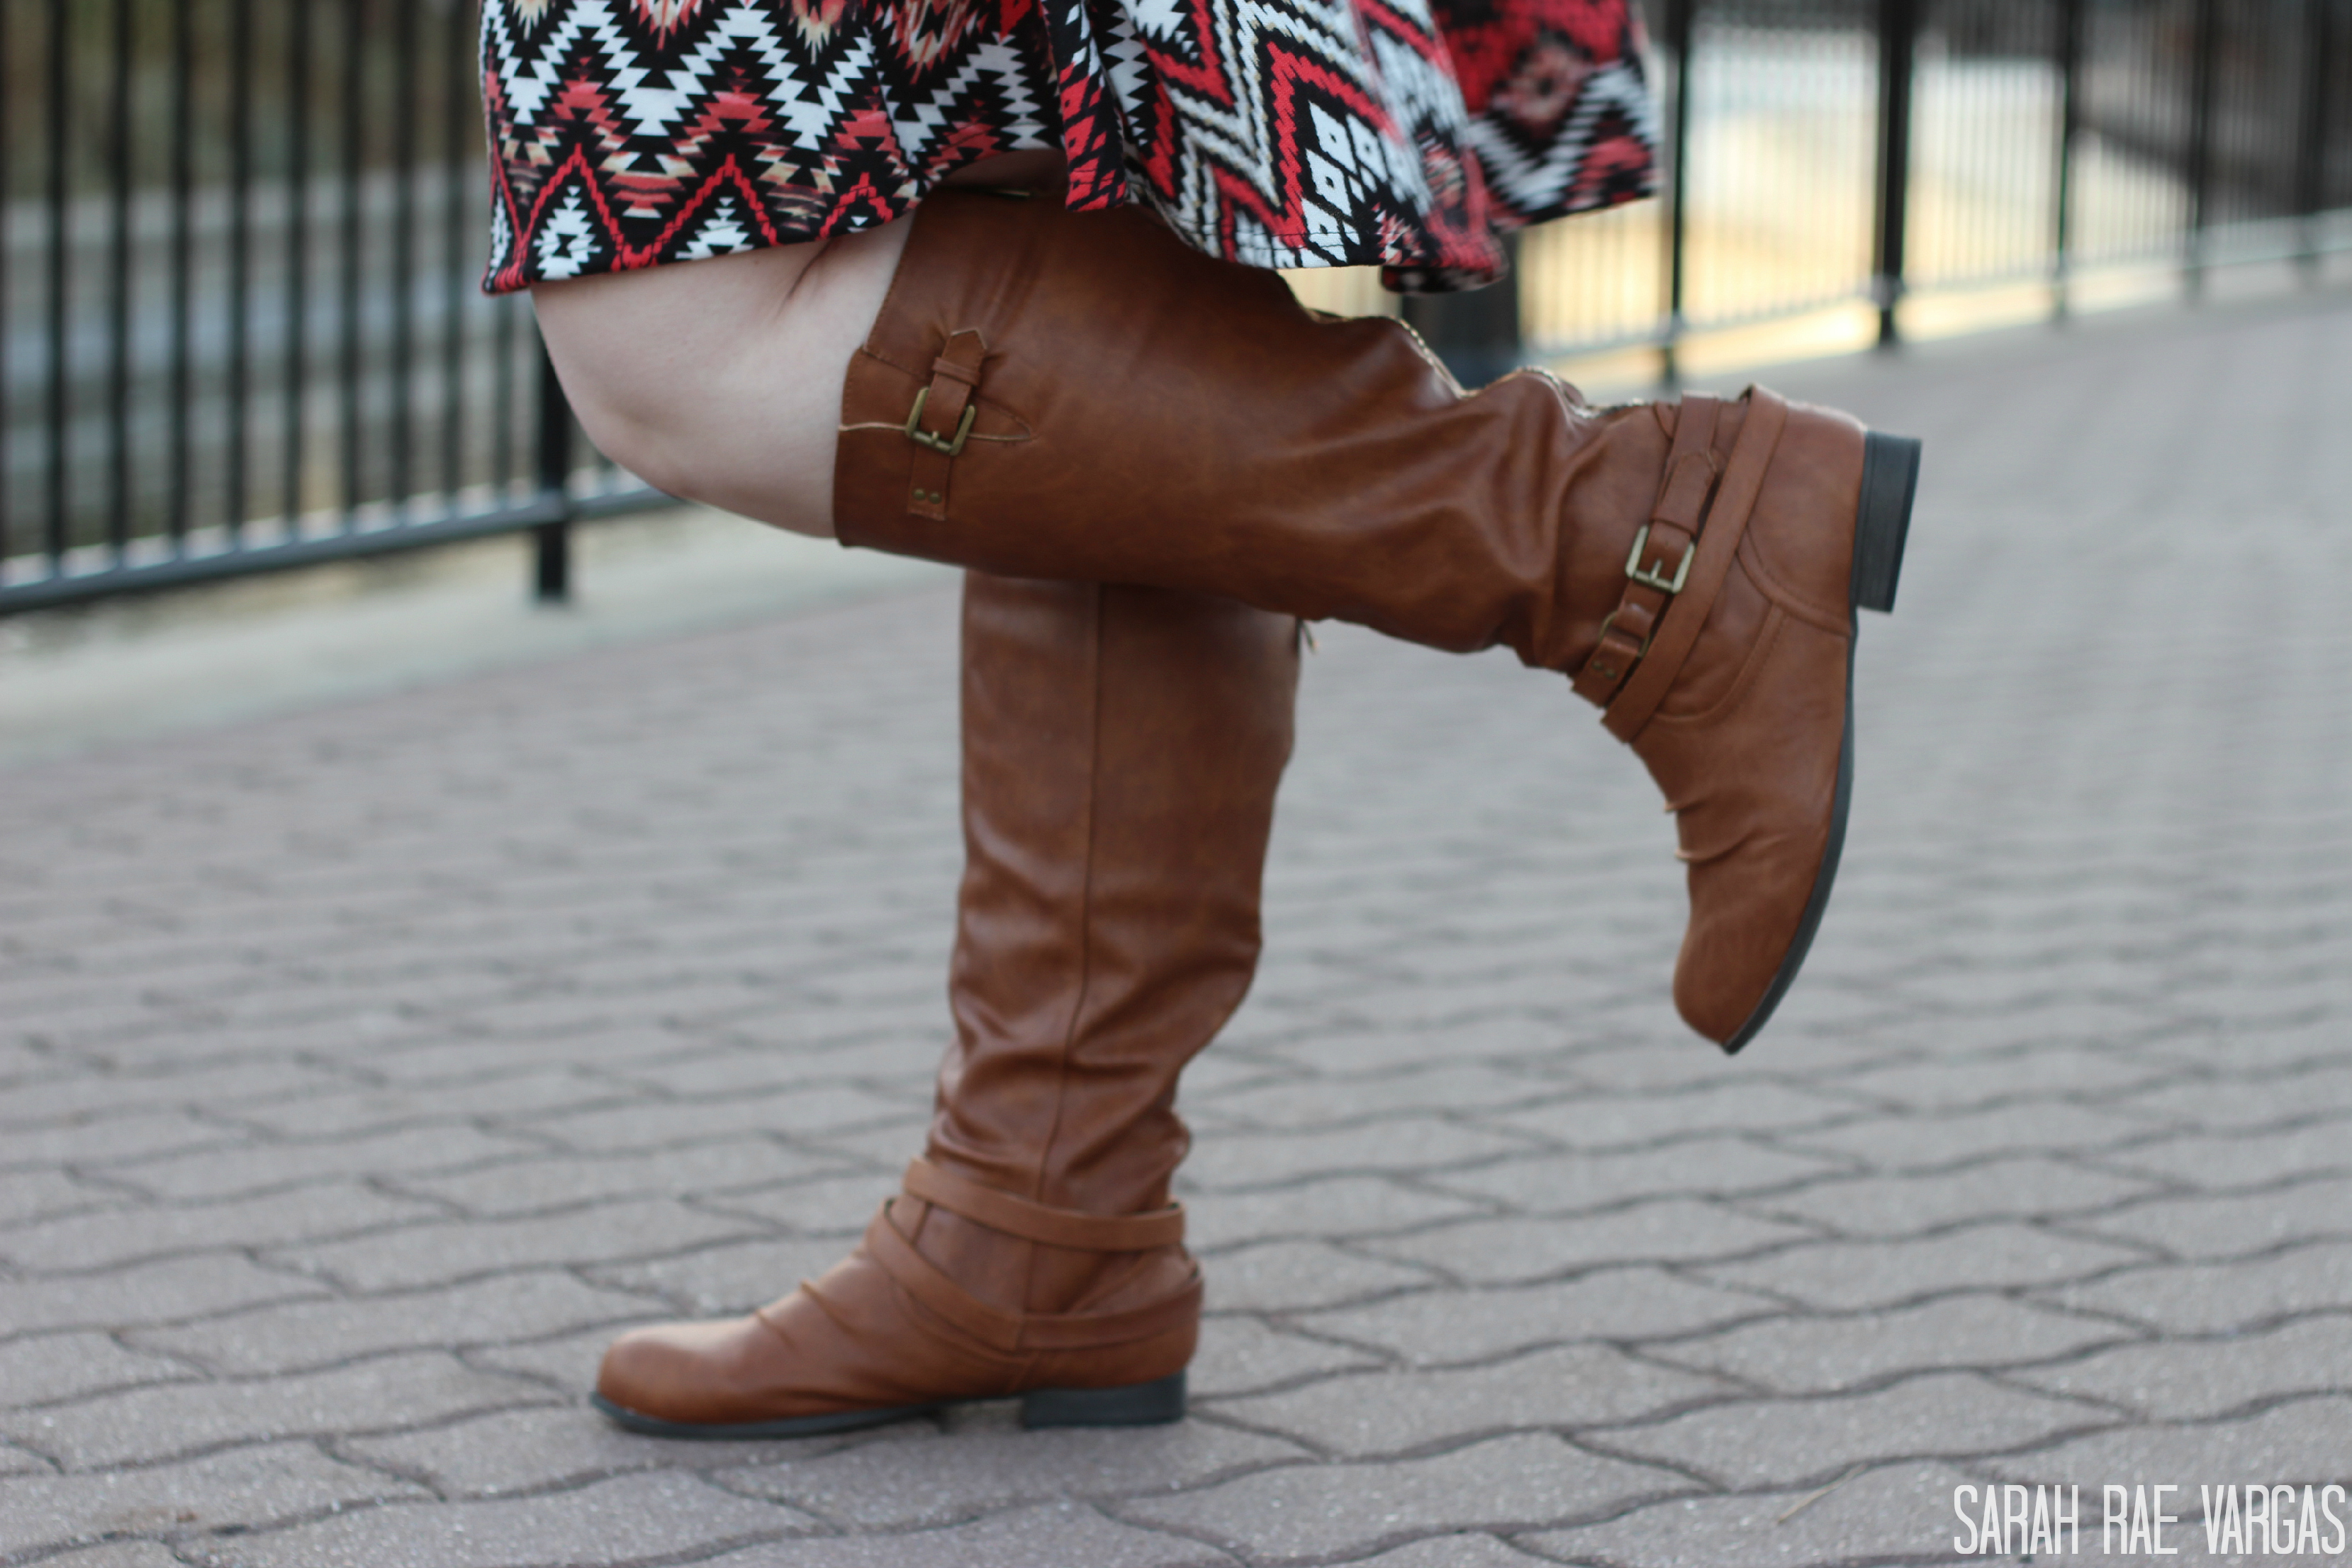 extra wide calf ugg style boots